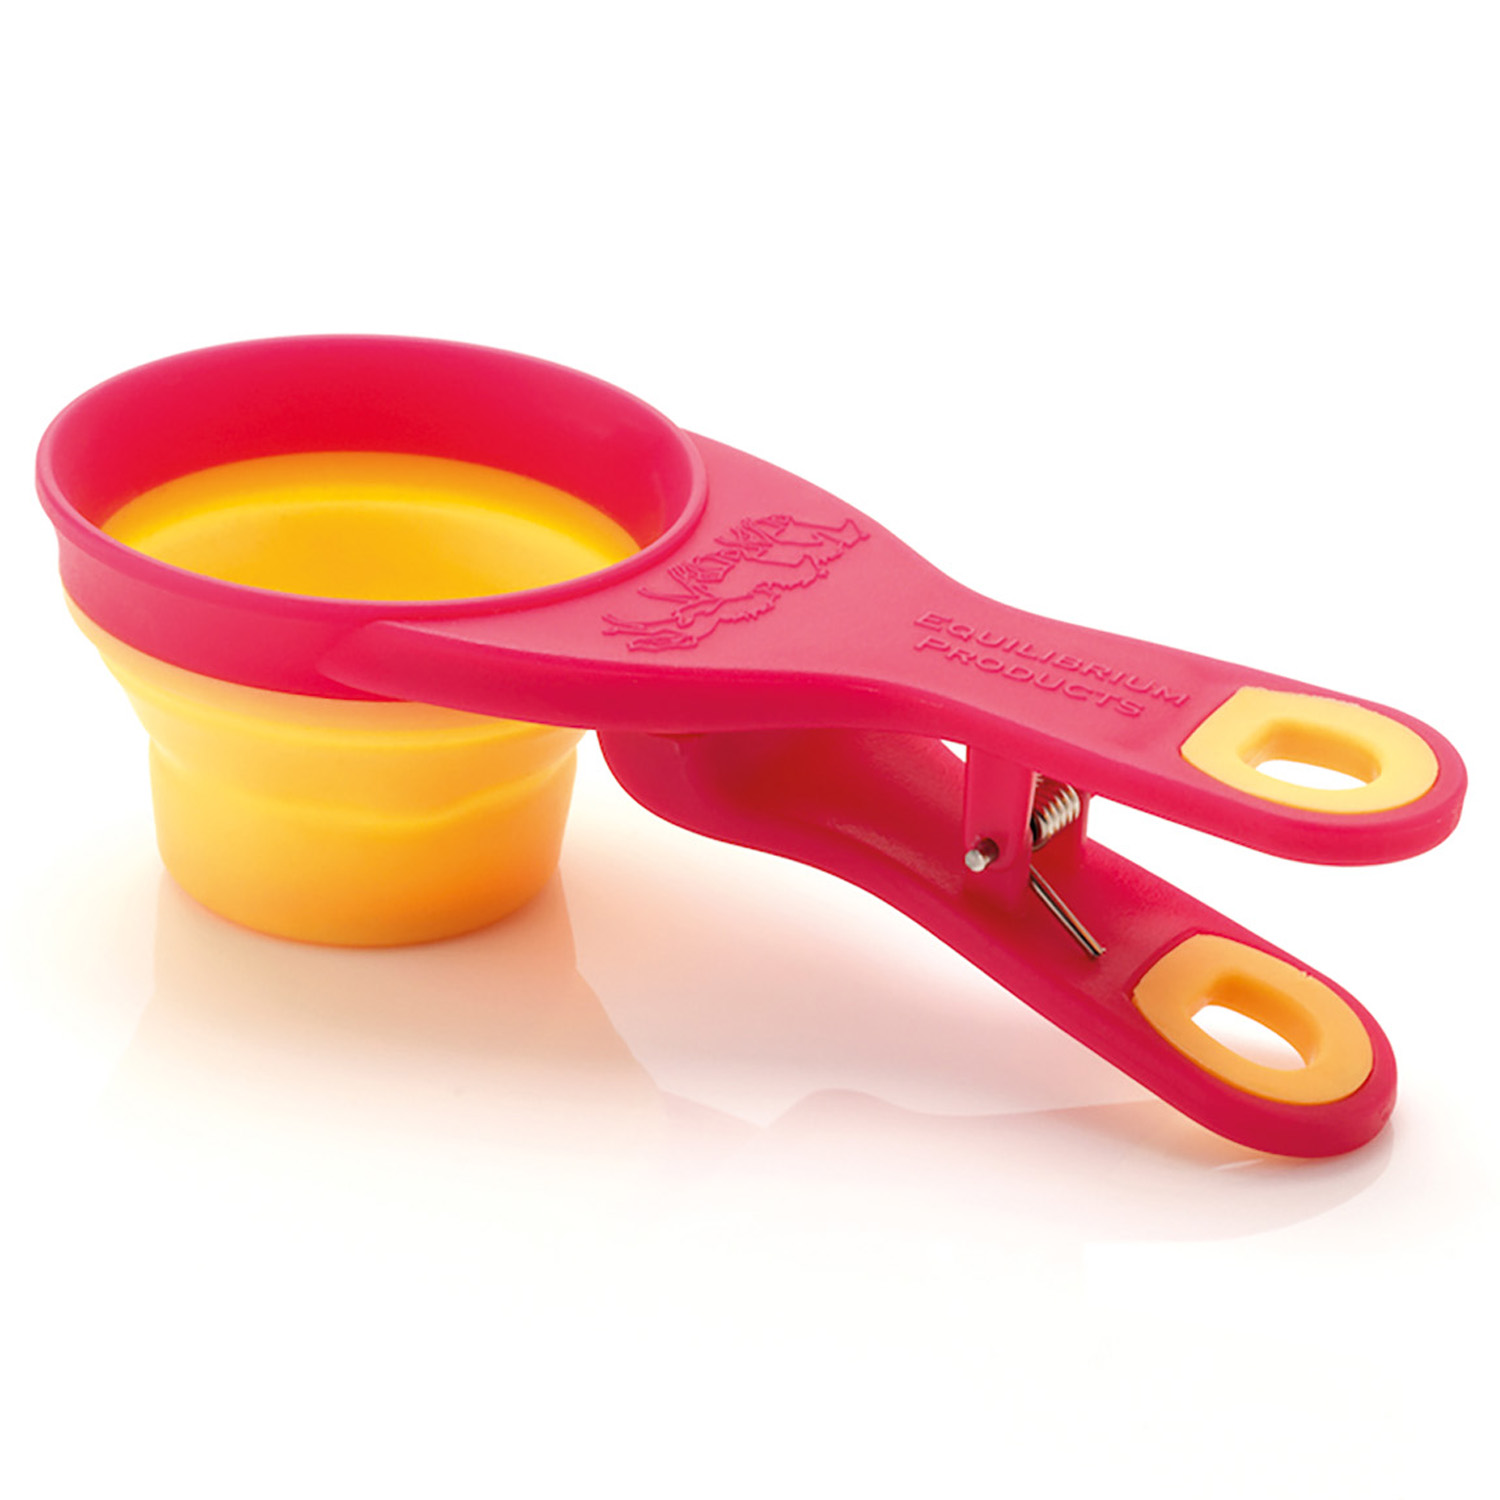 EQUILIBRIUM SIMPLY SCOOP PINK/YELLOW